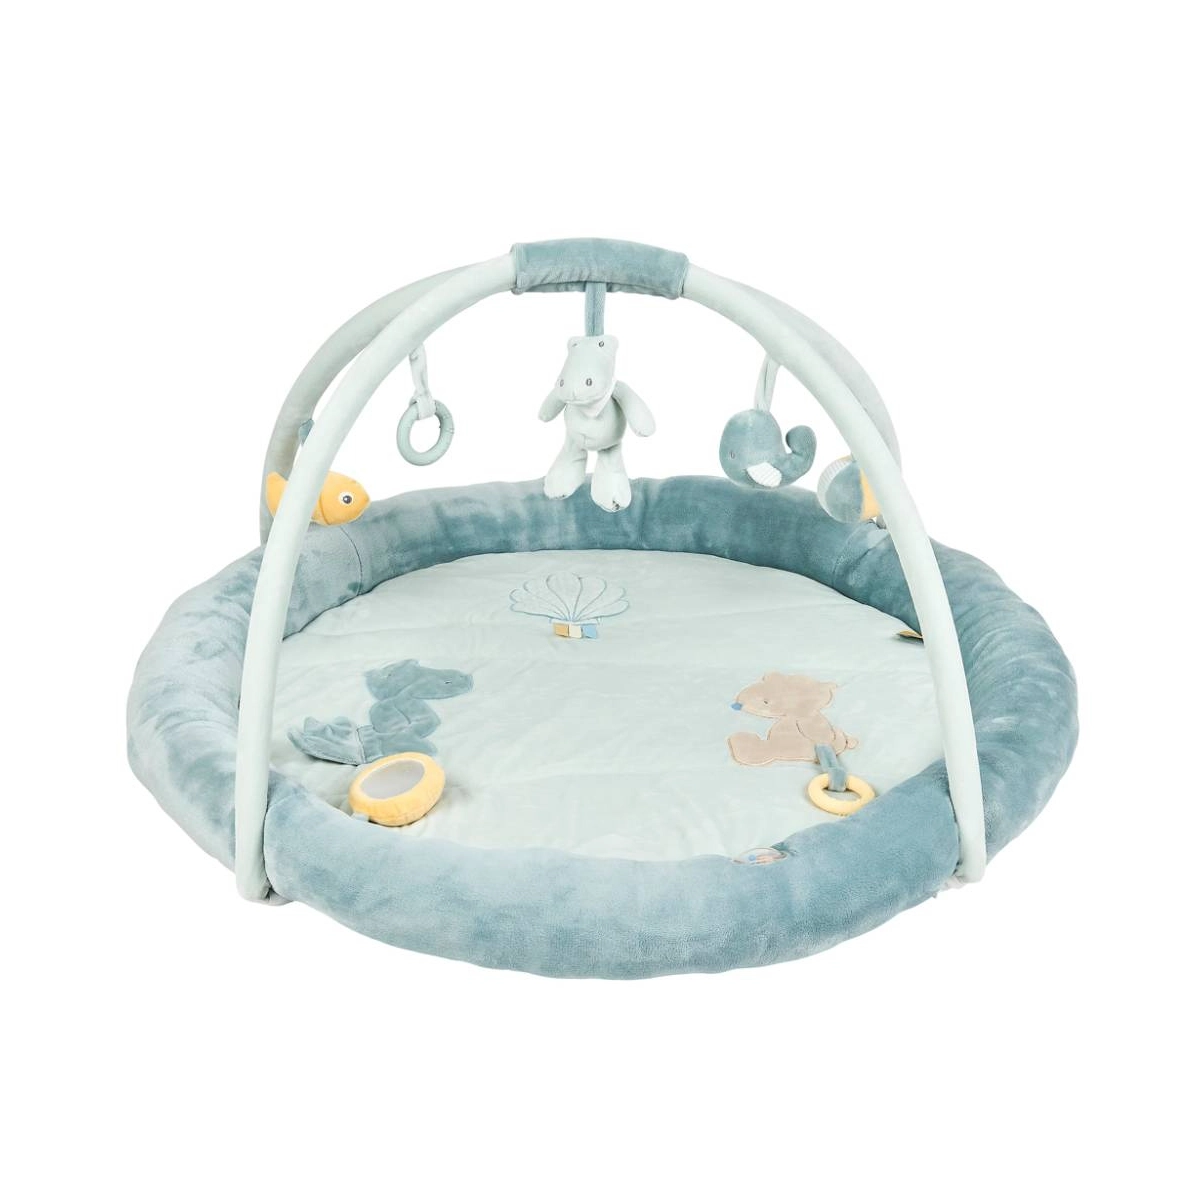 Nattou Romeo, Jules and Sally Stuffed Playmat with Arches